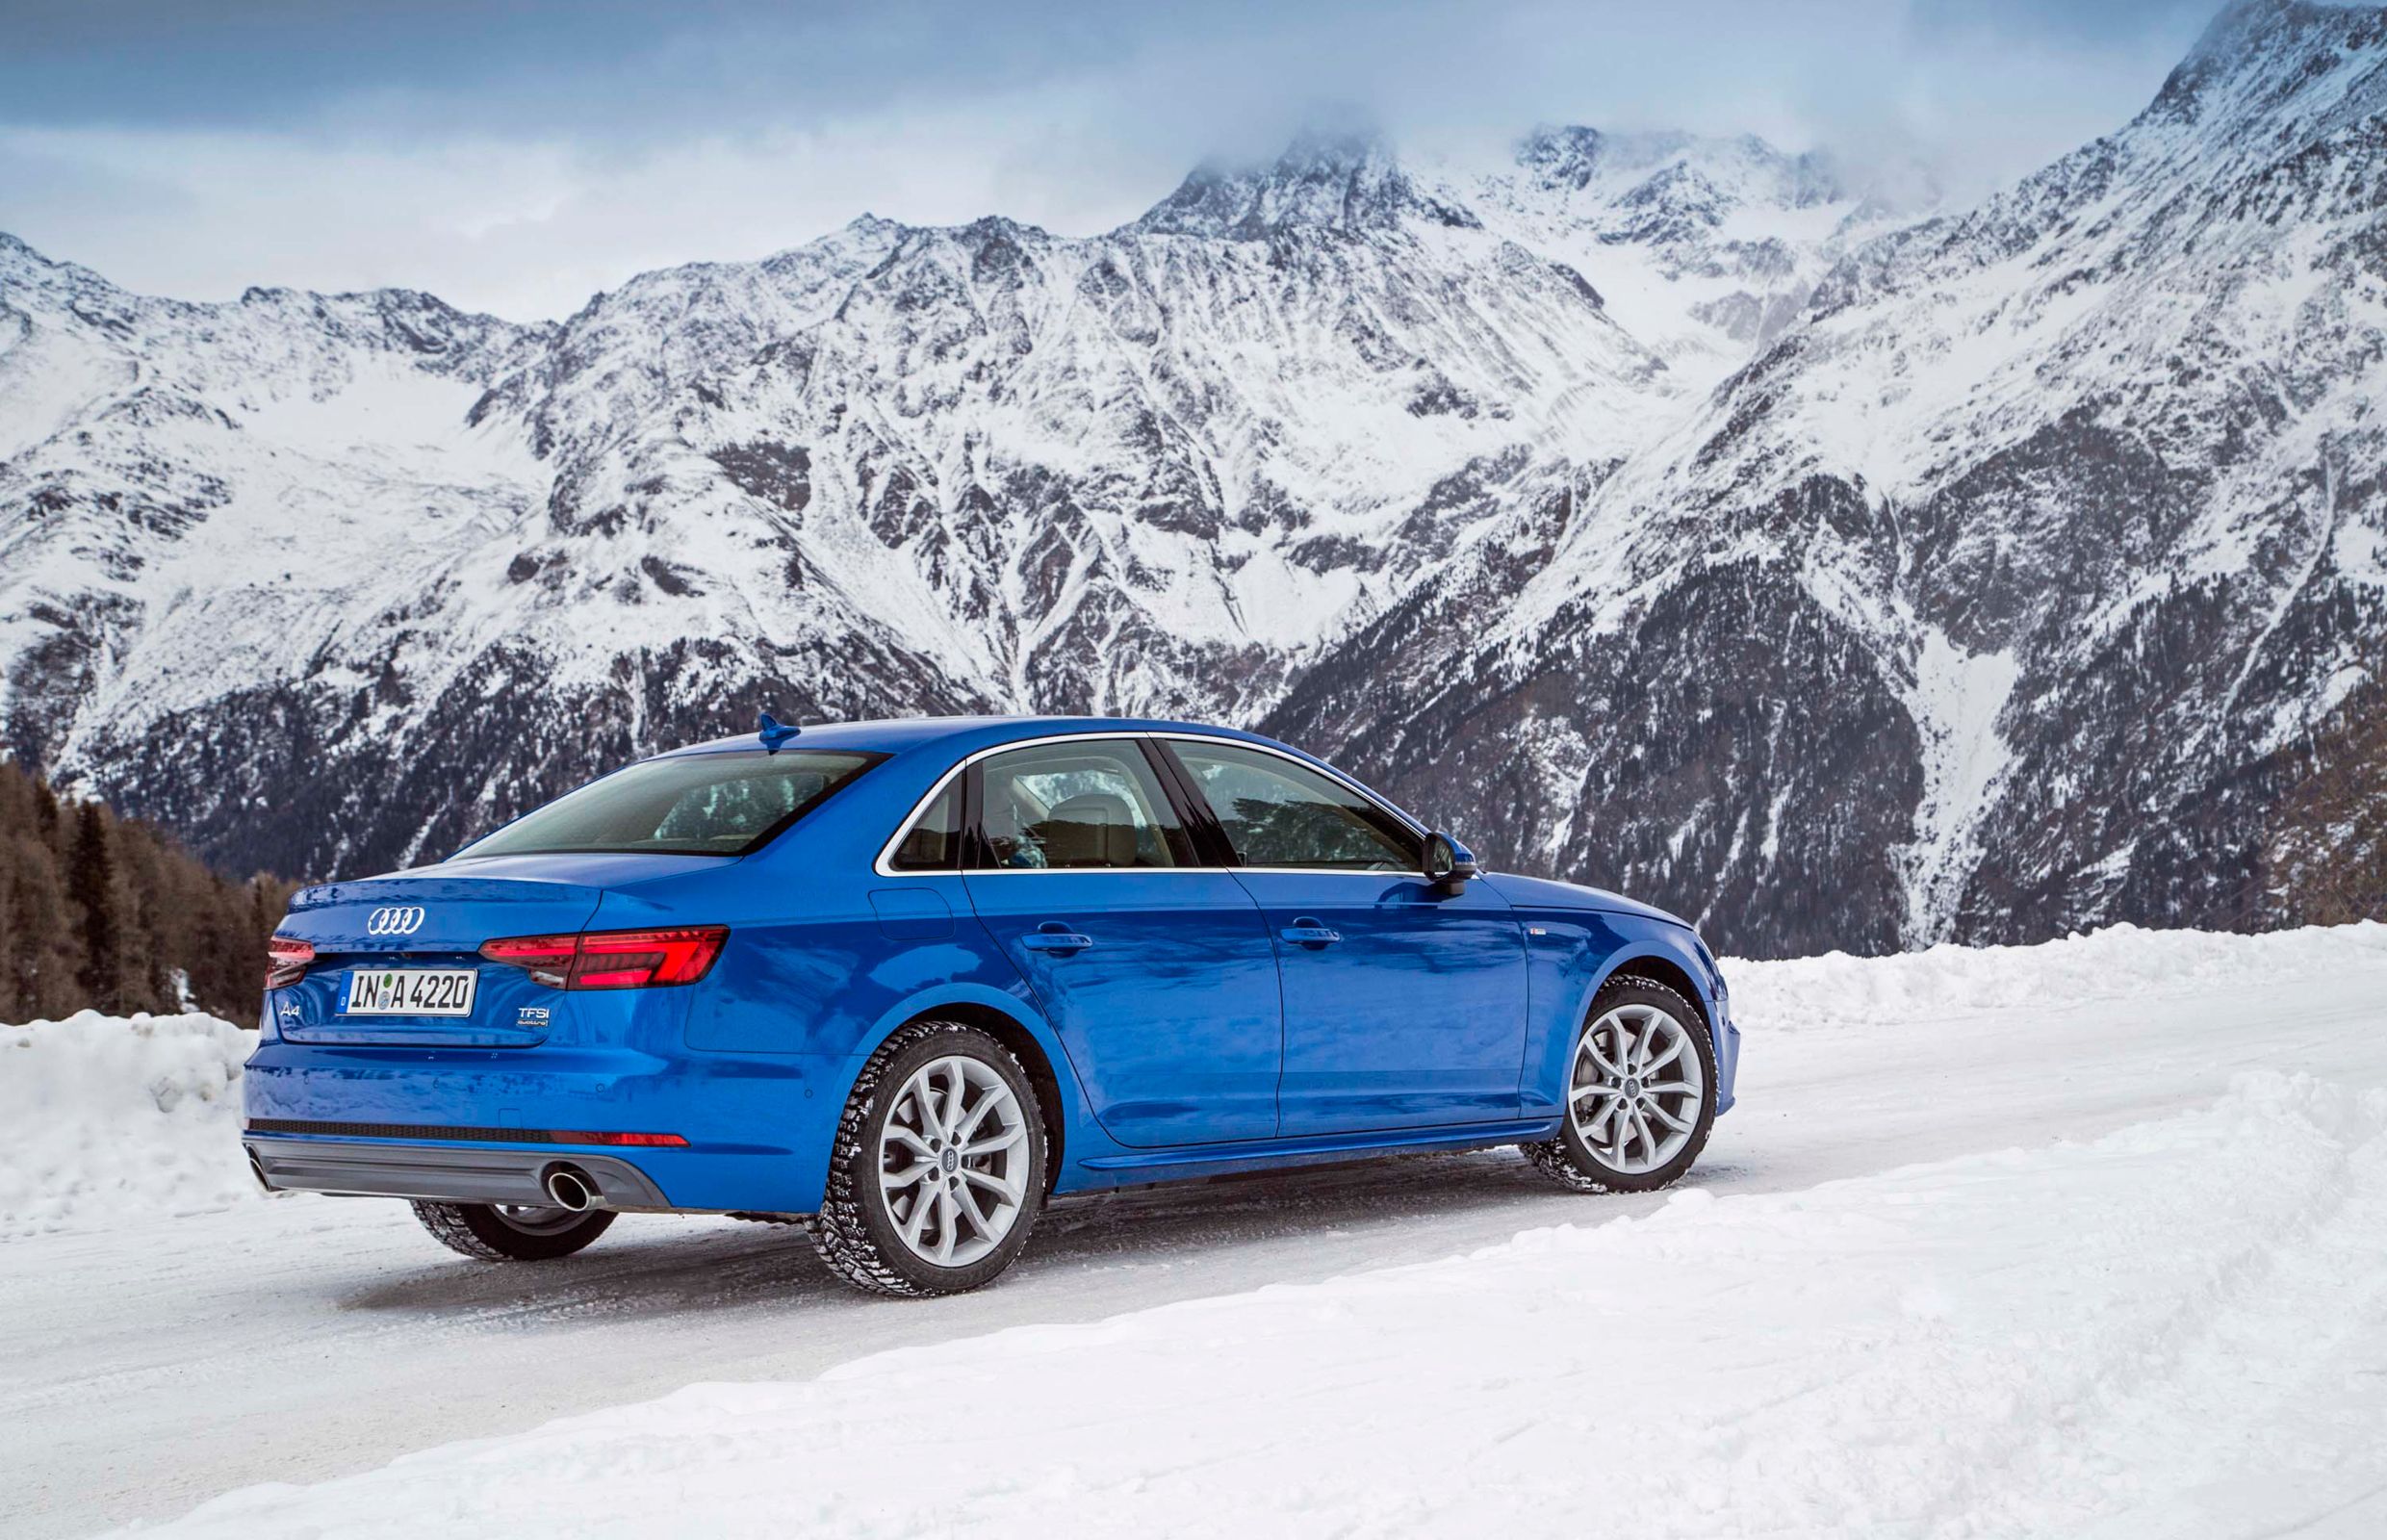 Audi's quattro shows not all AWD systems are alike